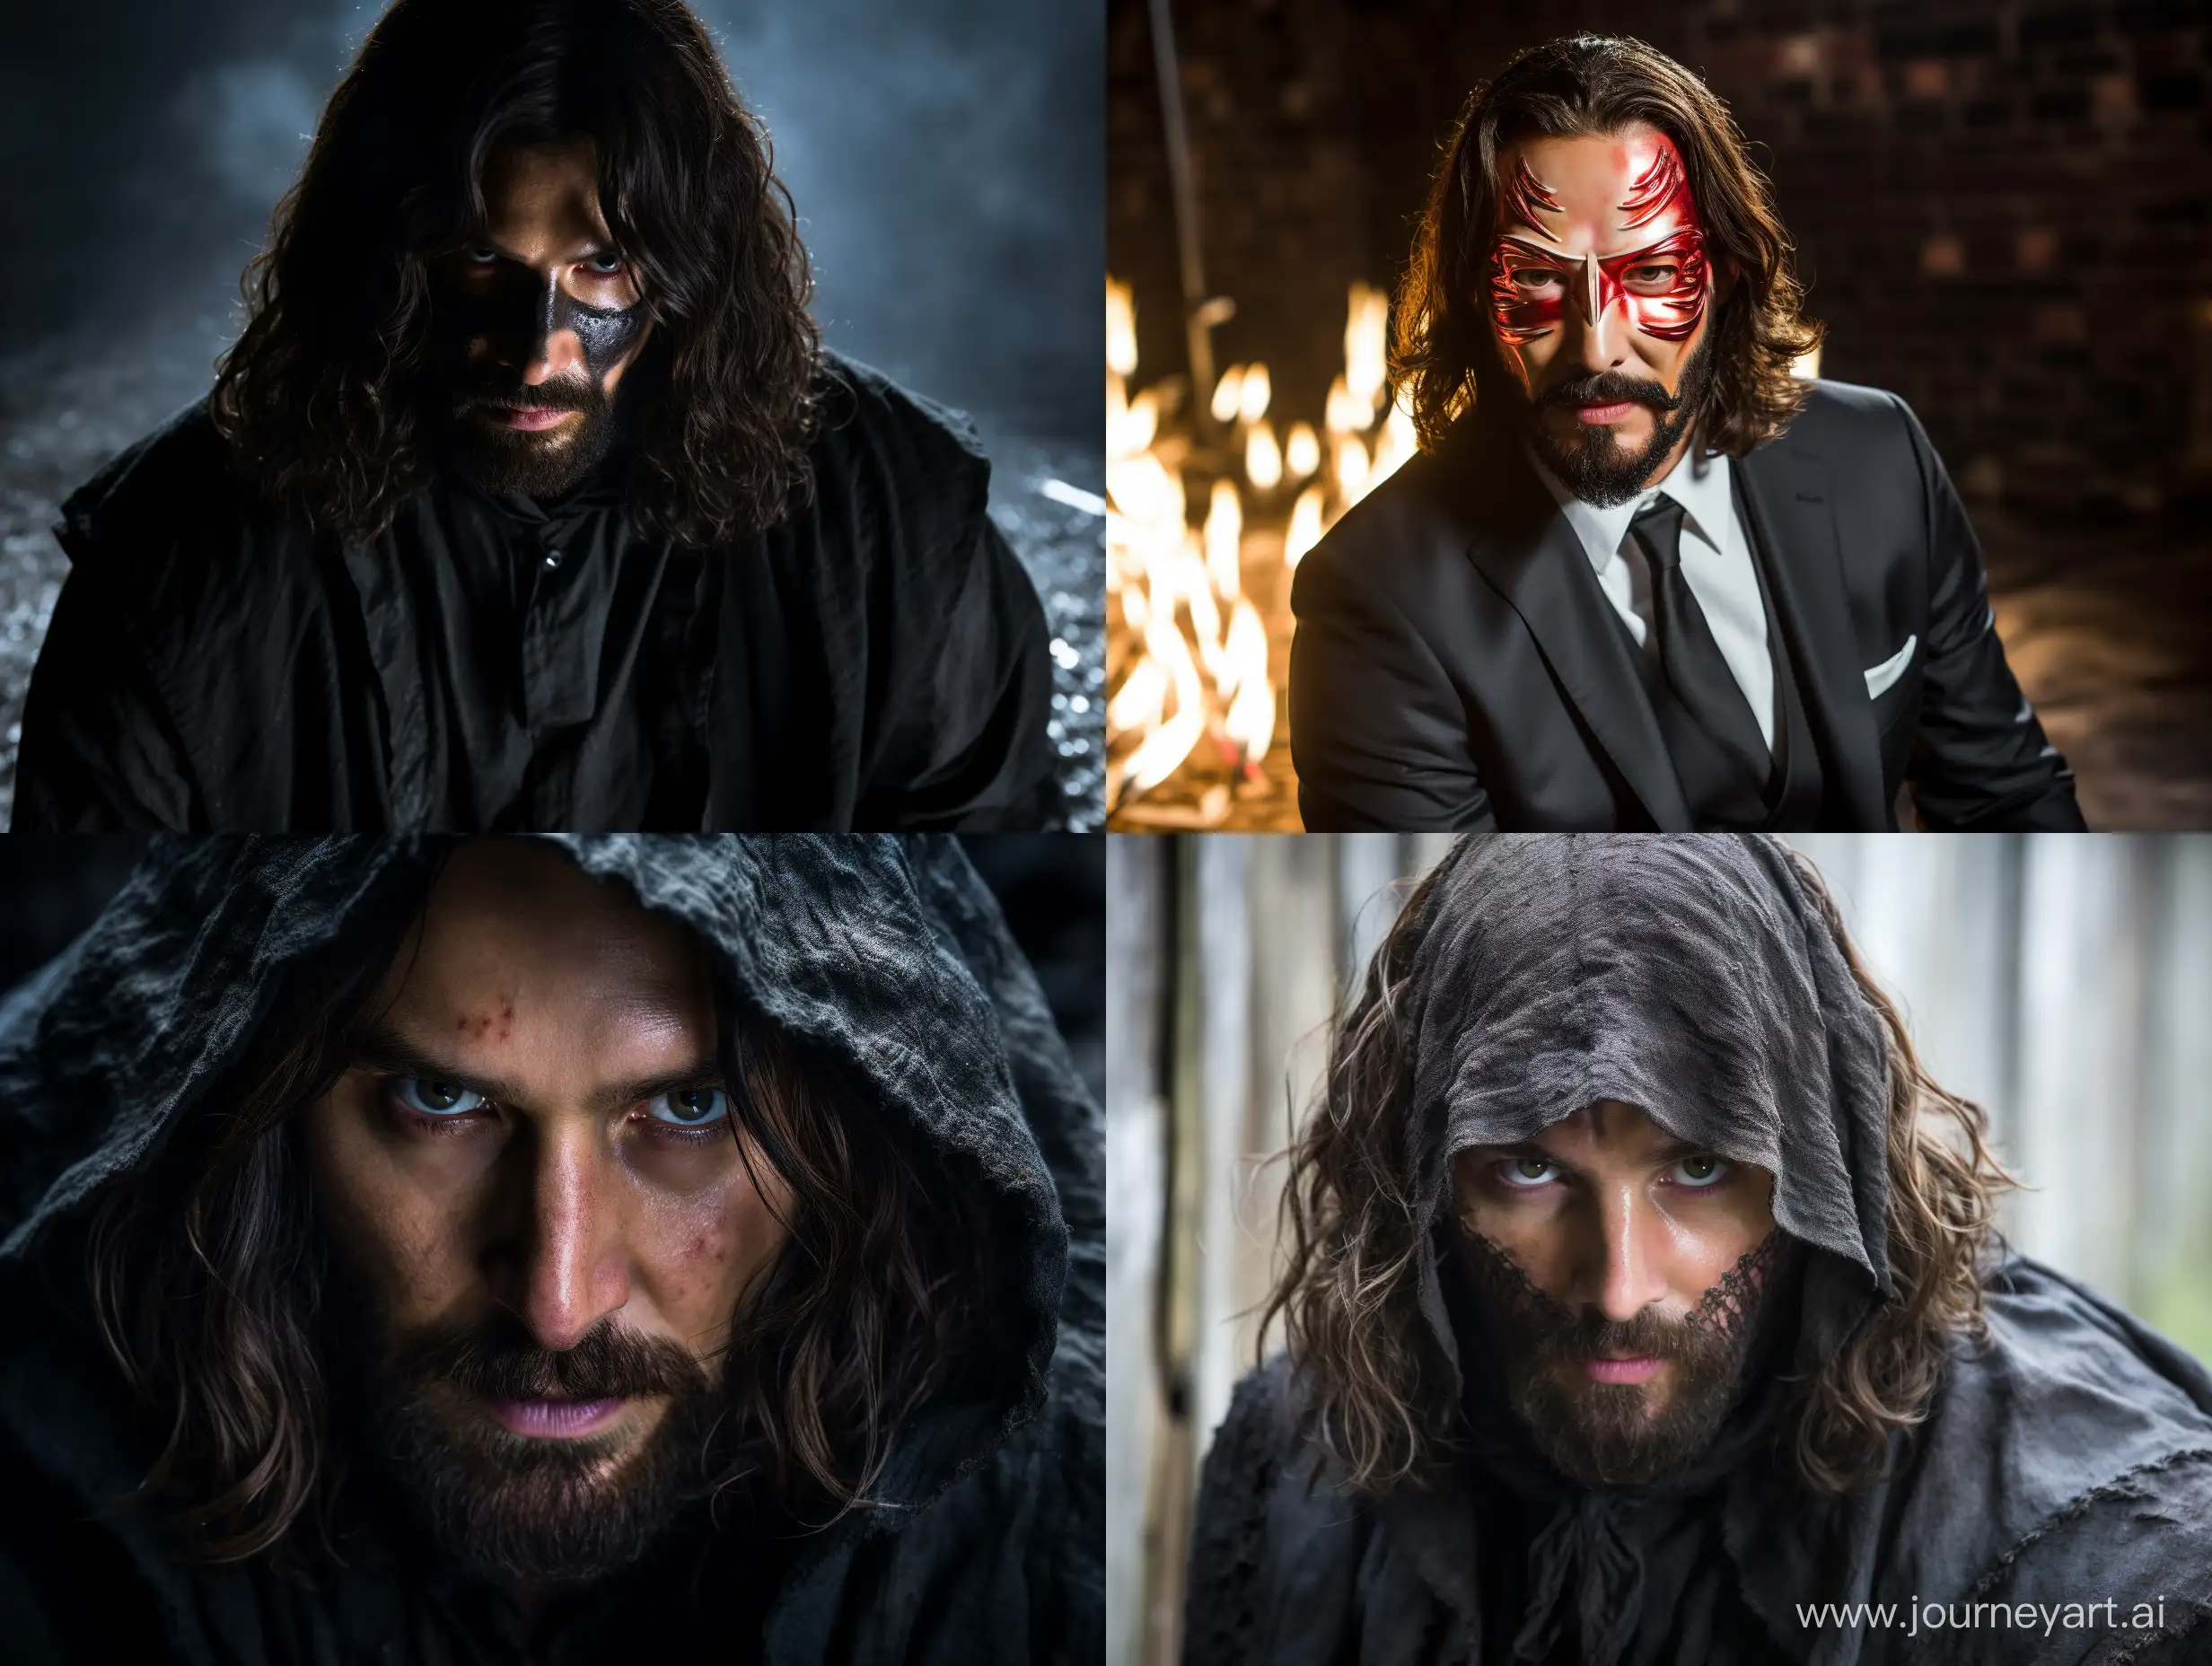 John-Wick-Unveils-Invincible-Guy-Fawkes-Persona-Bewitching-Alliance-of-Two-Icons